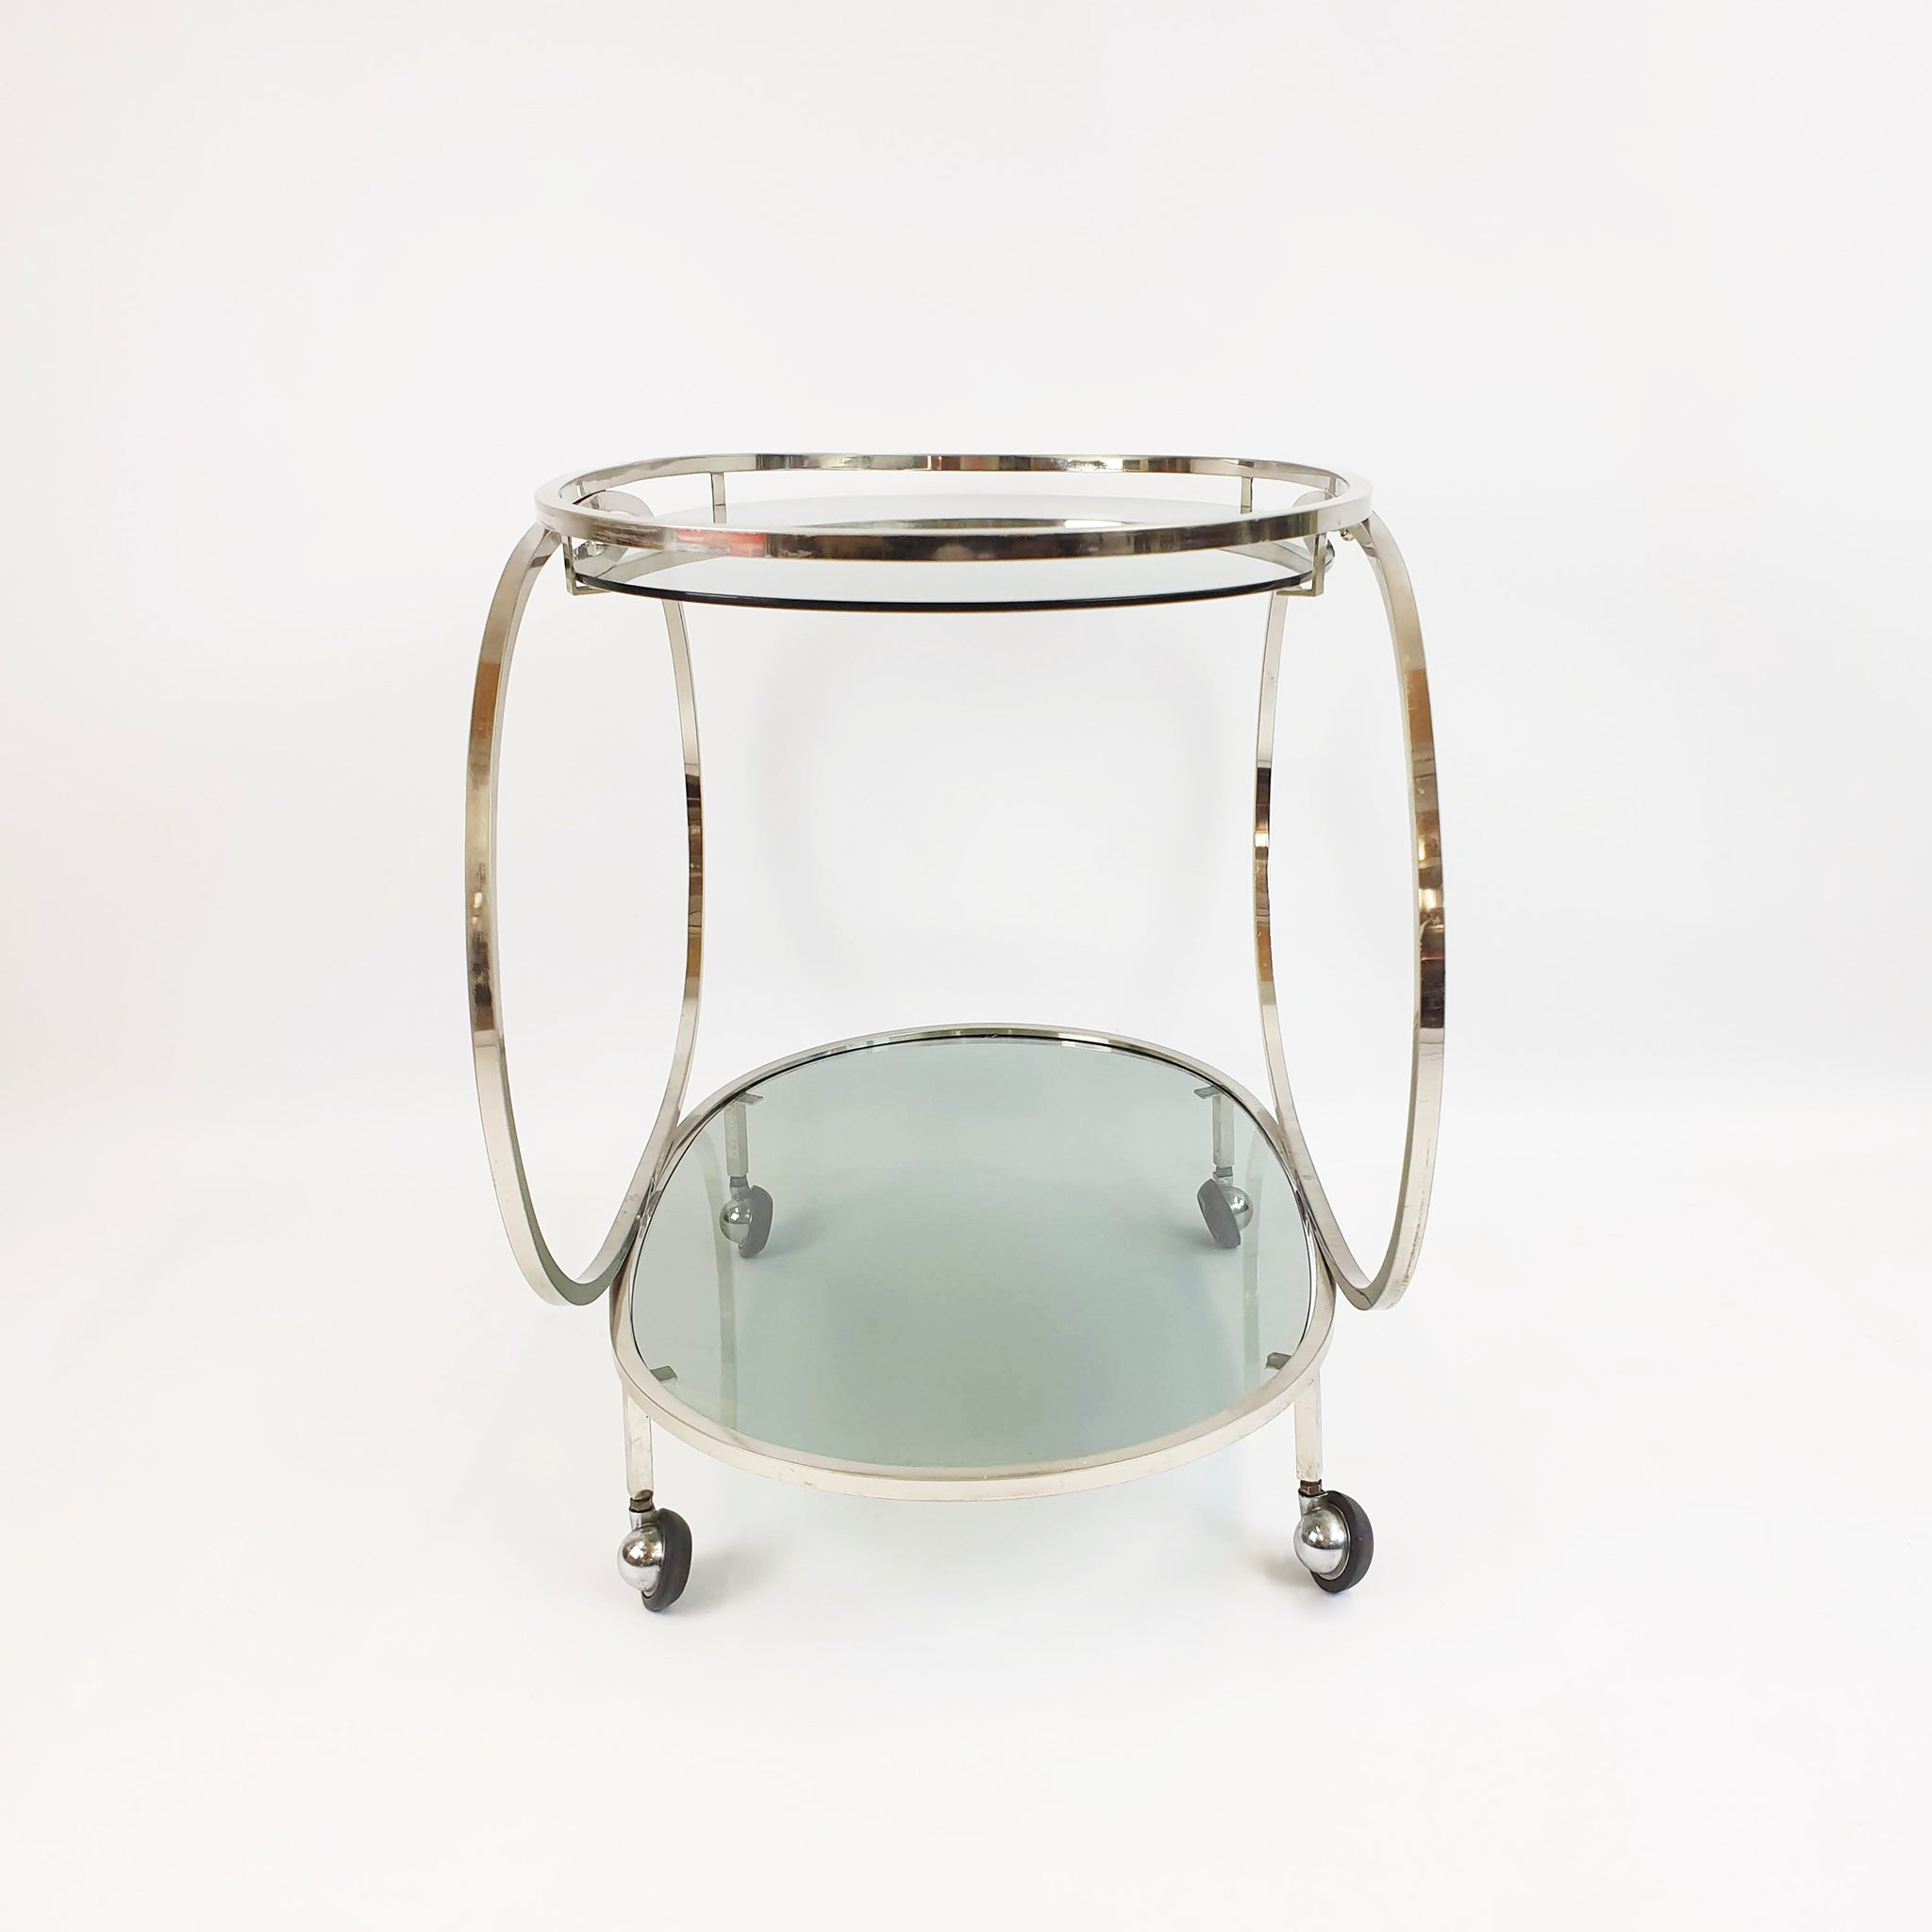 1970s Italian Space Age chrome and glass serving trolley